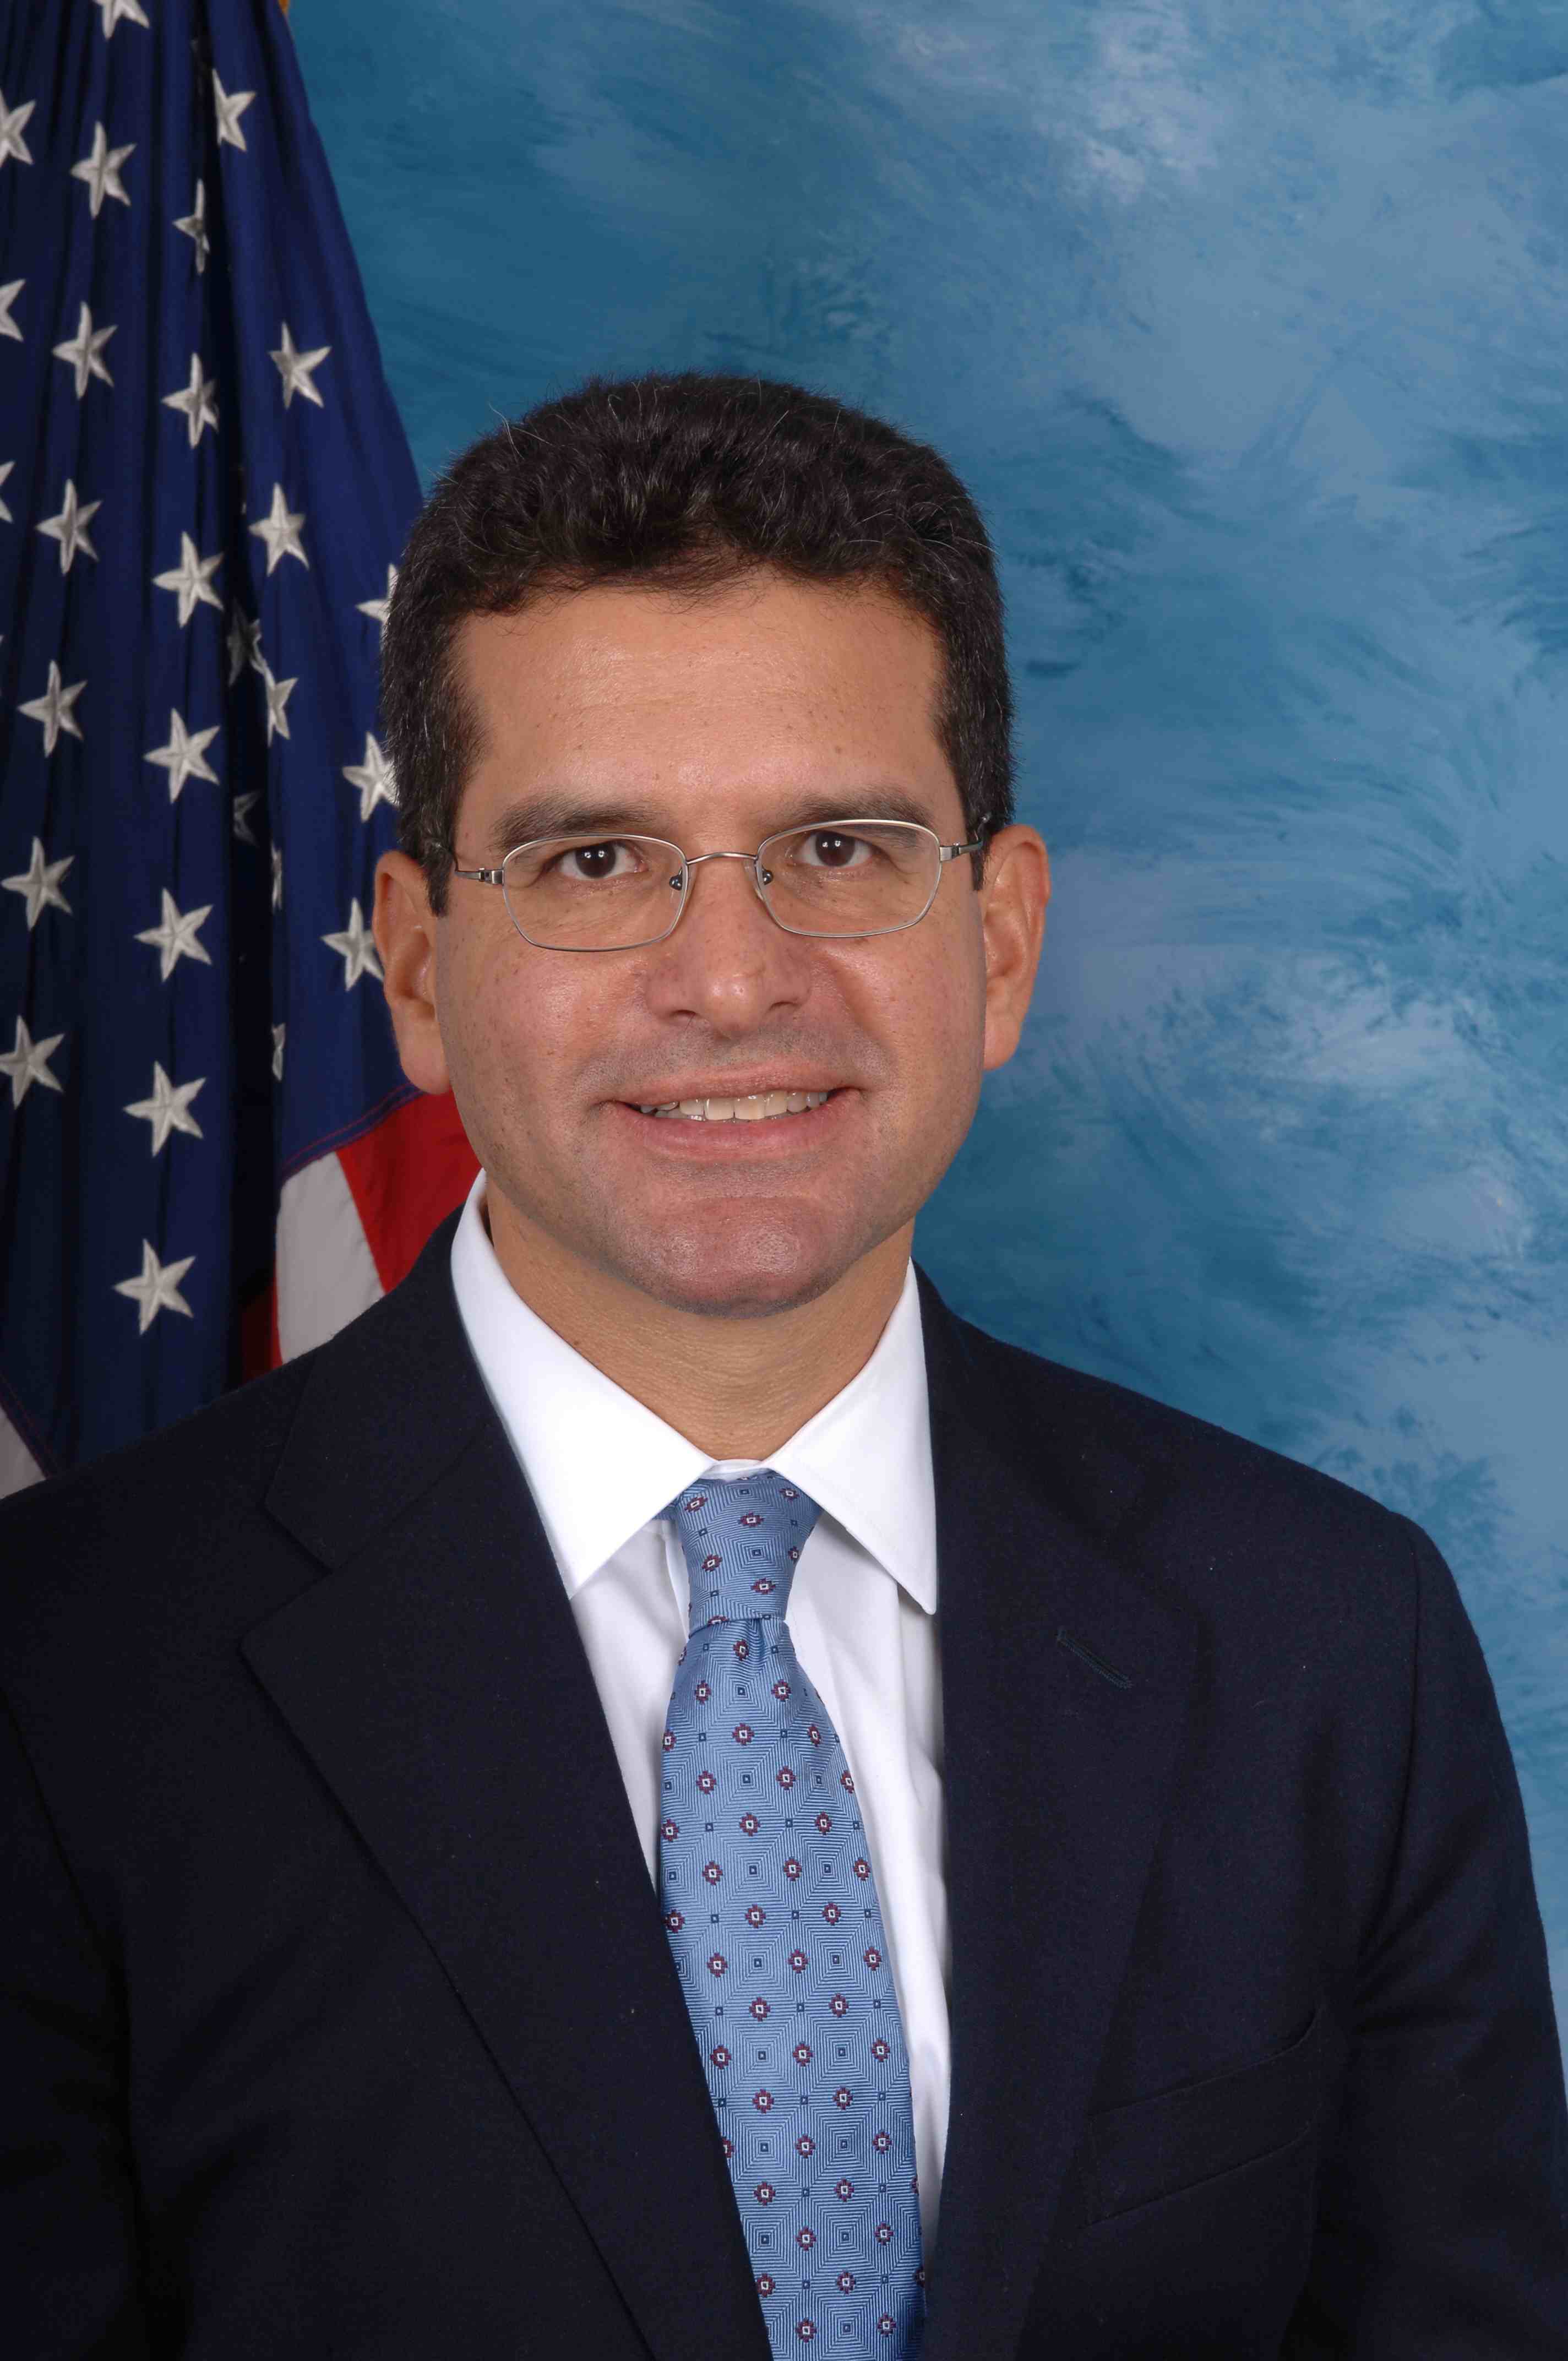 Puerto Rico's new governor is challenged in court - newspaper